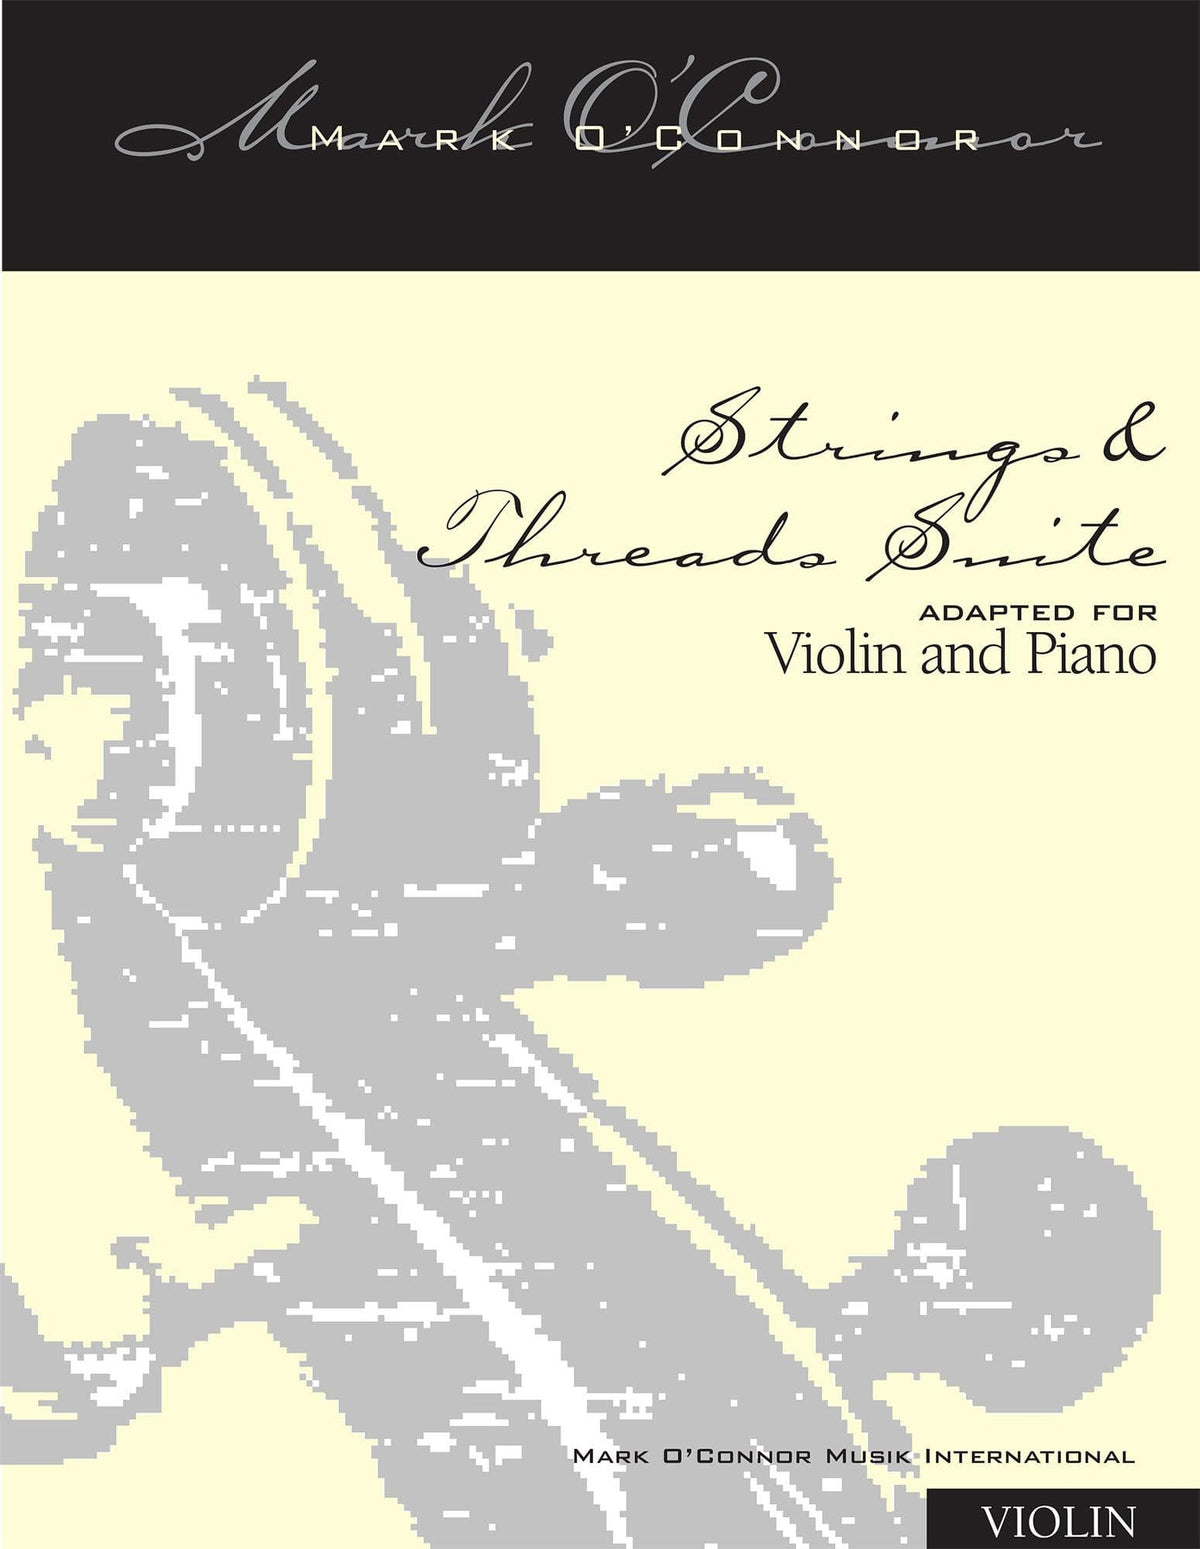 O'Connor, Mark - Strings & Threads Suite for Violin and Piano - Violin - Digital Download